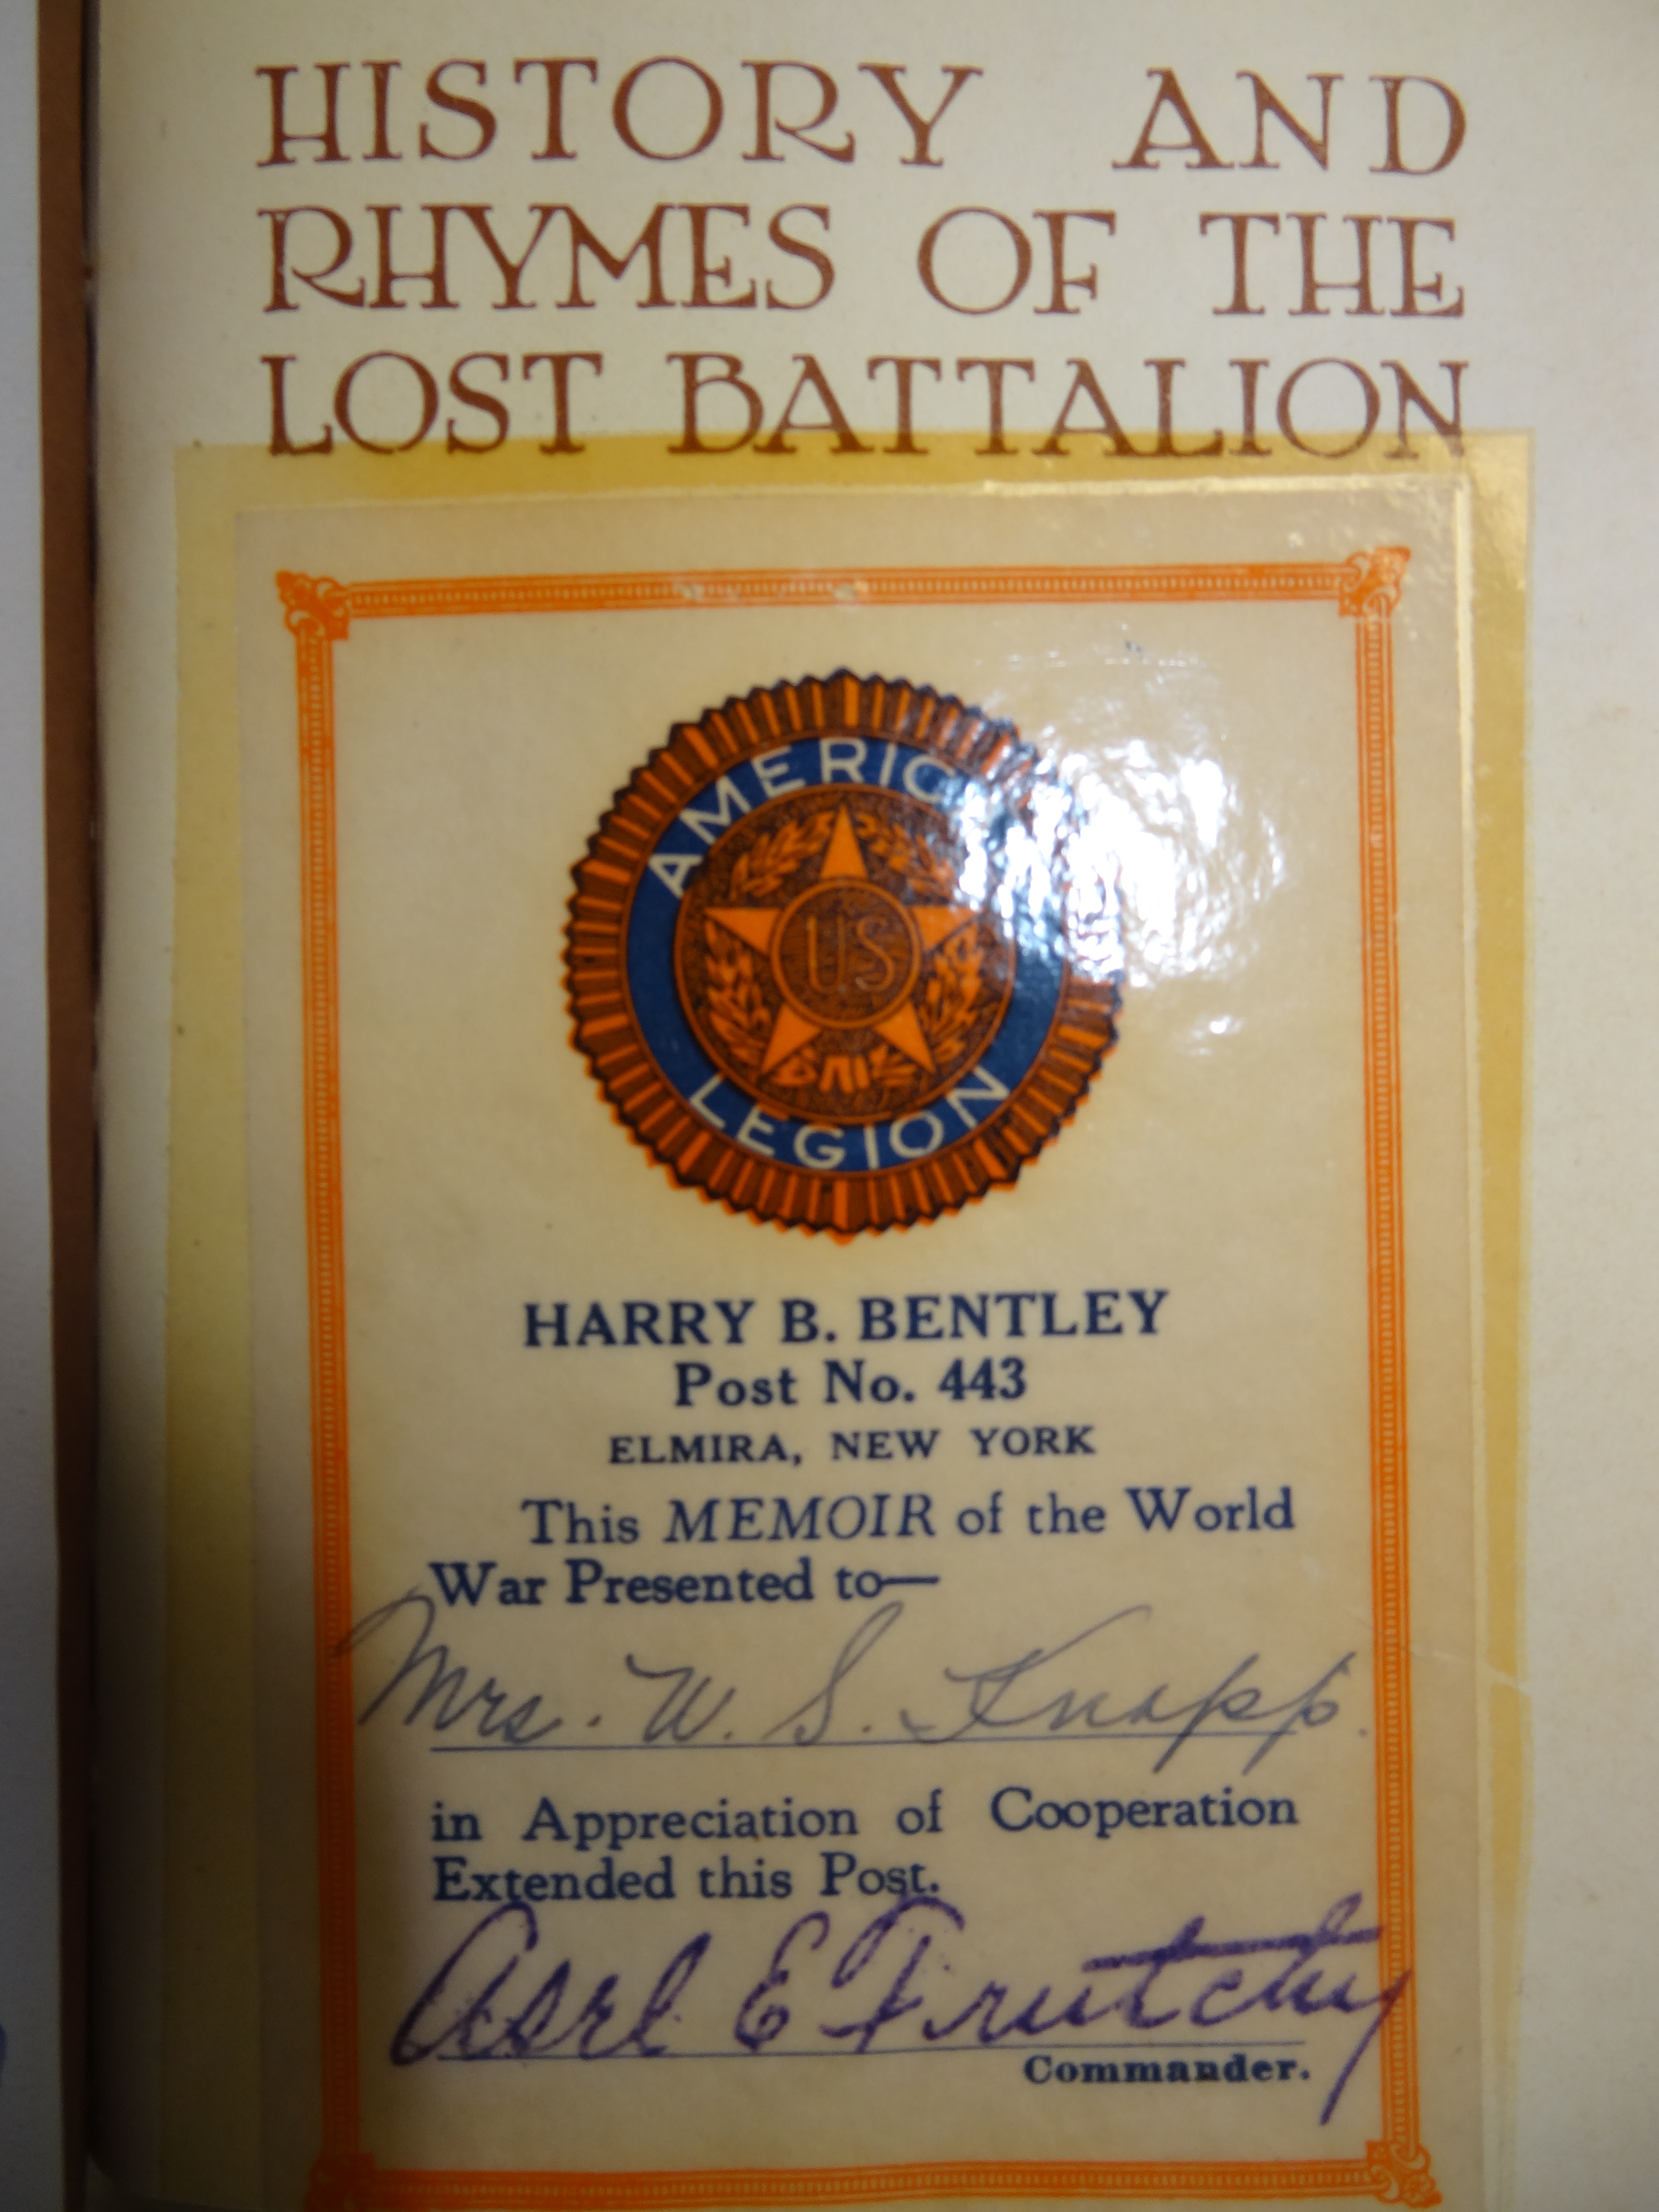 History and Rhymes of the Lost Battalion: Reference 973.91 M129.